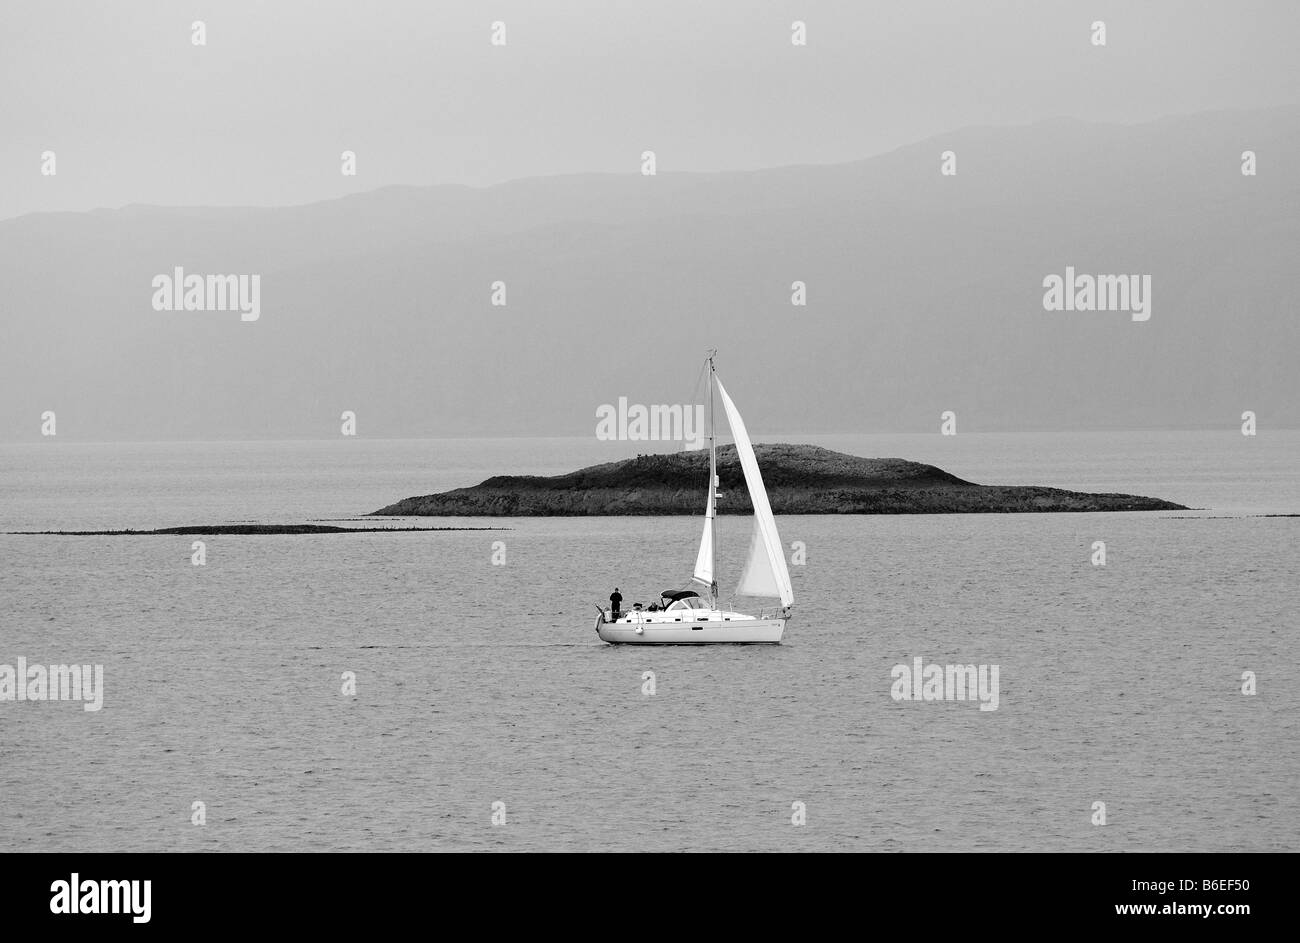 A luxurious yacht sailboat catches strong breeze as it sails across the open ocean with rocky islands in the background freedom Stock Photo